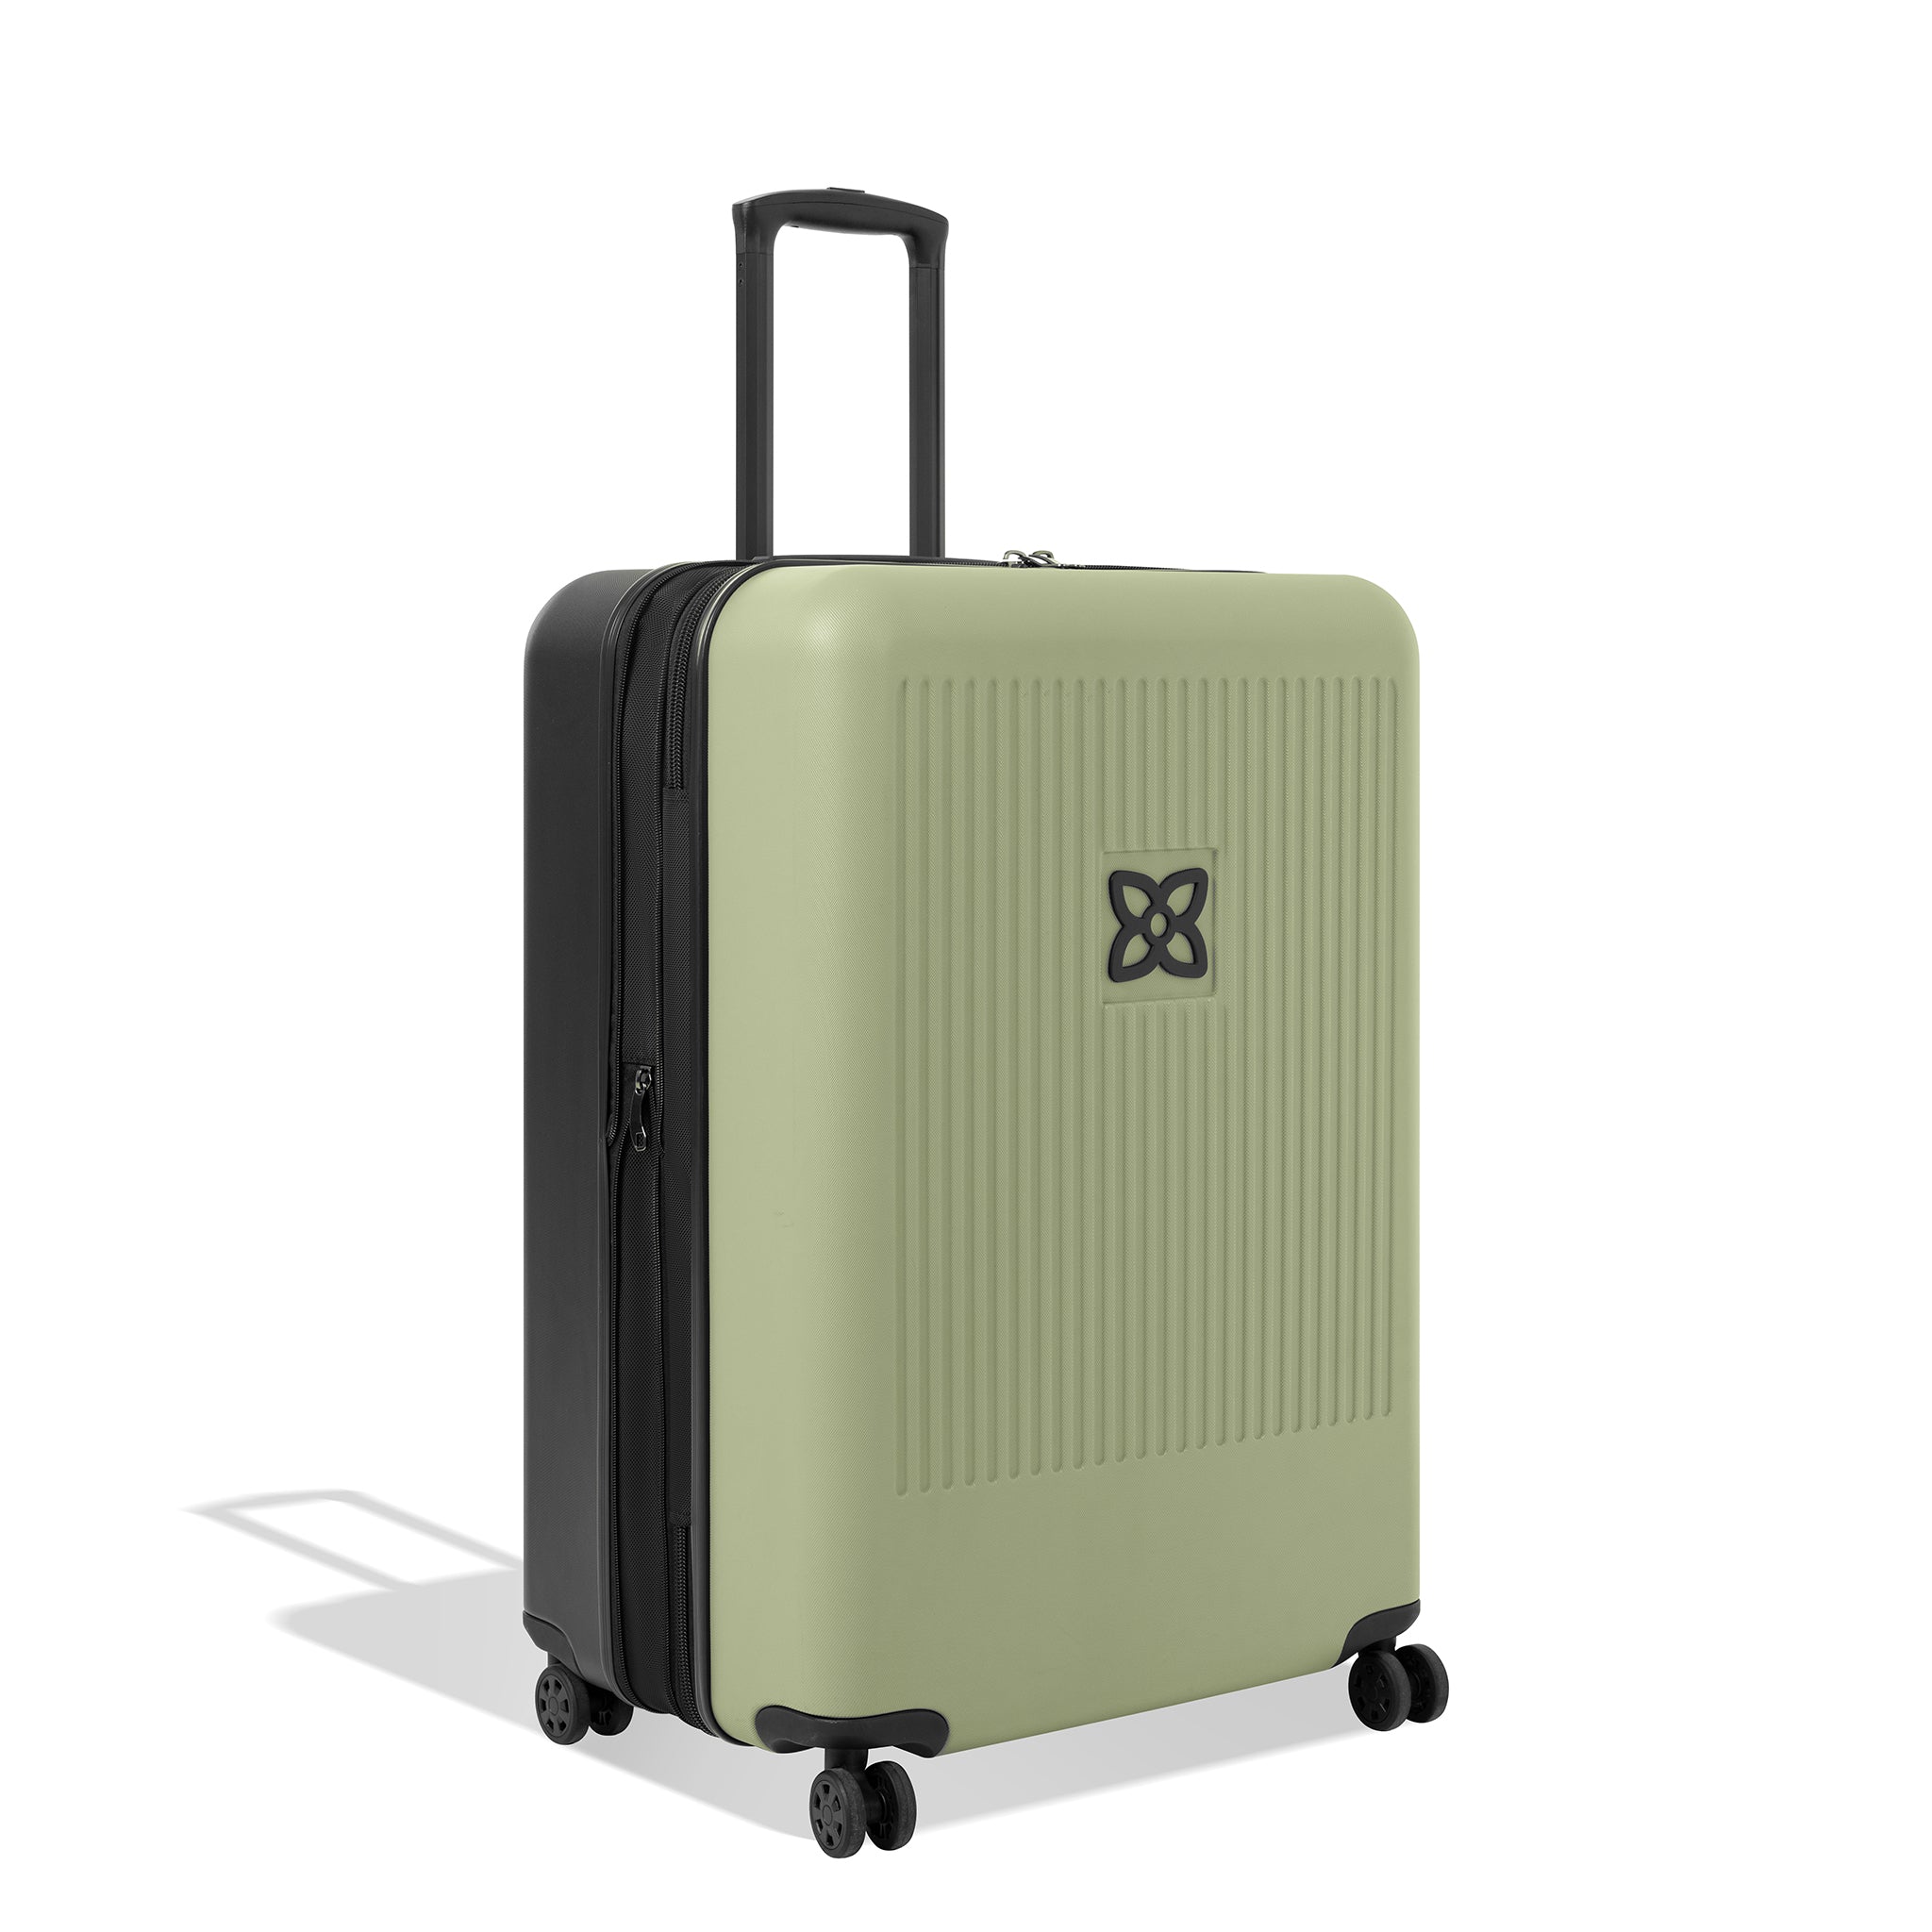 Angled front view of Sherpani hard-shell checked luggage, the Meridian in Sage. 